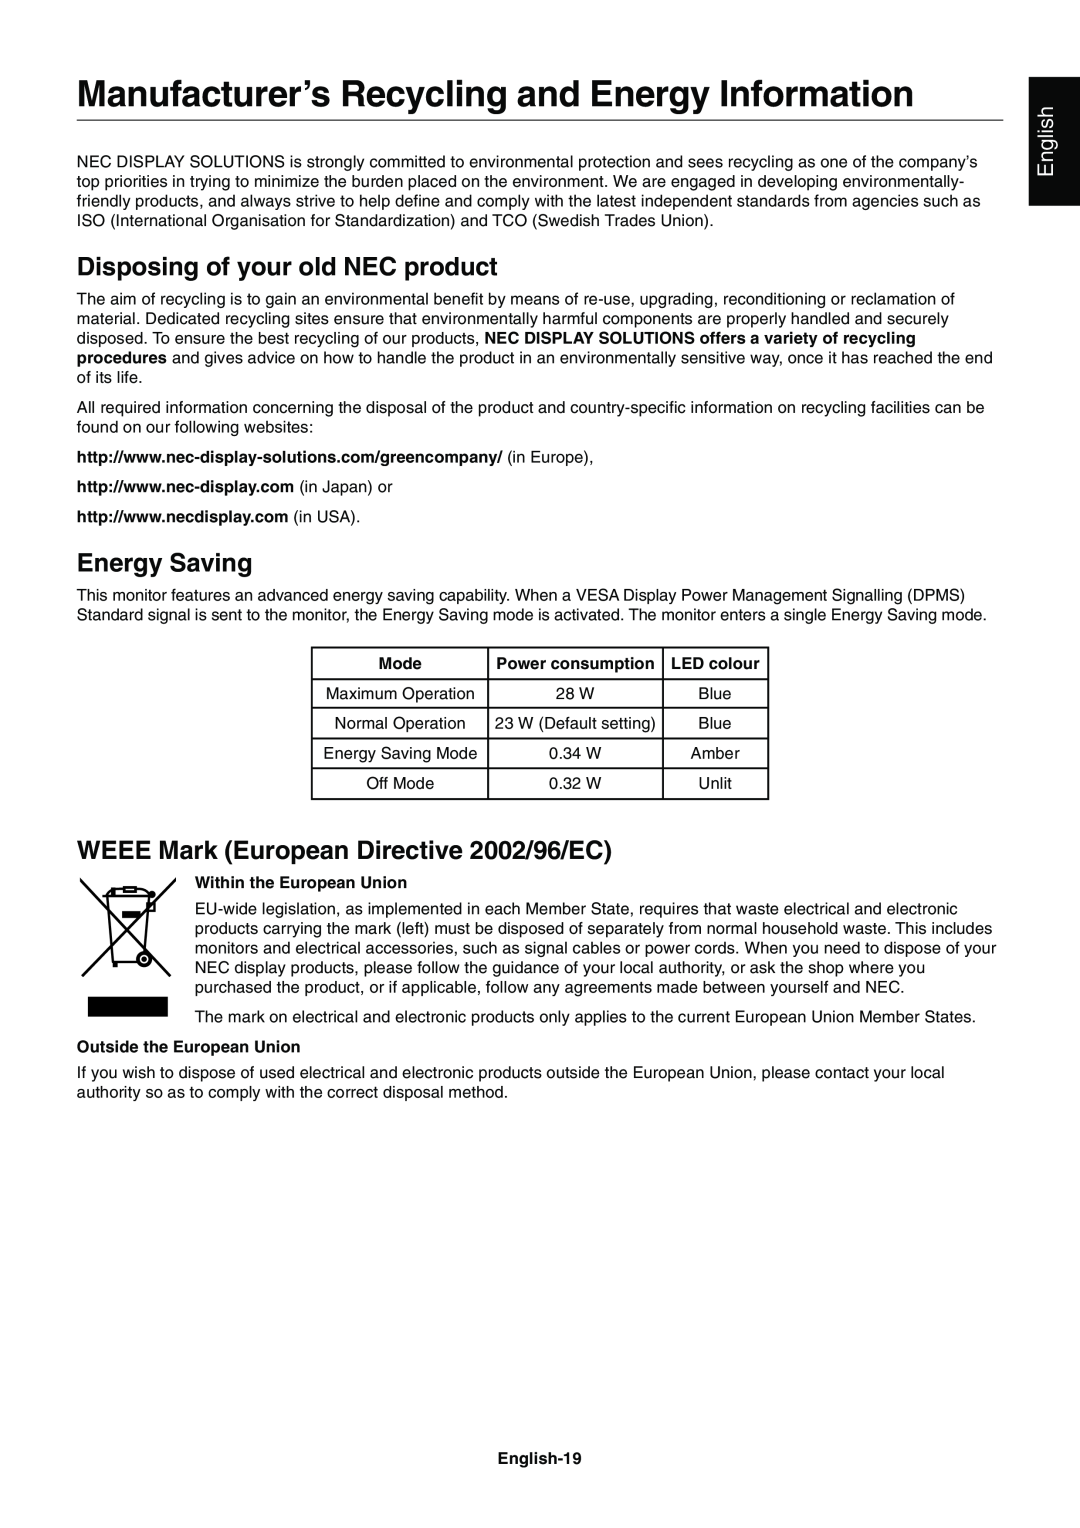 NEC E231W-BK Manufacturer’s Recycling and Energy Information, Disposing of your old NEC product, Energy Saving, English 